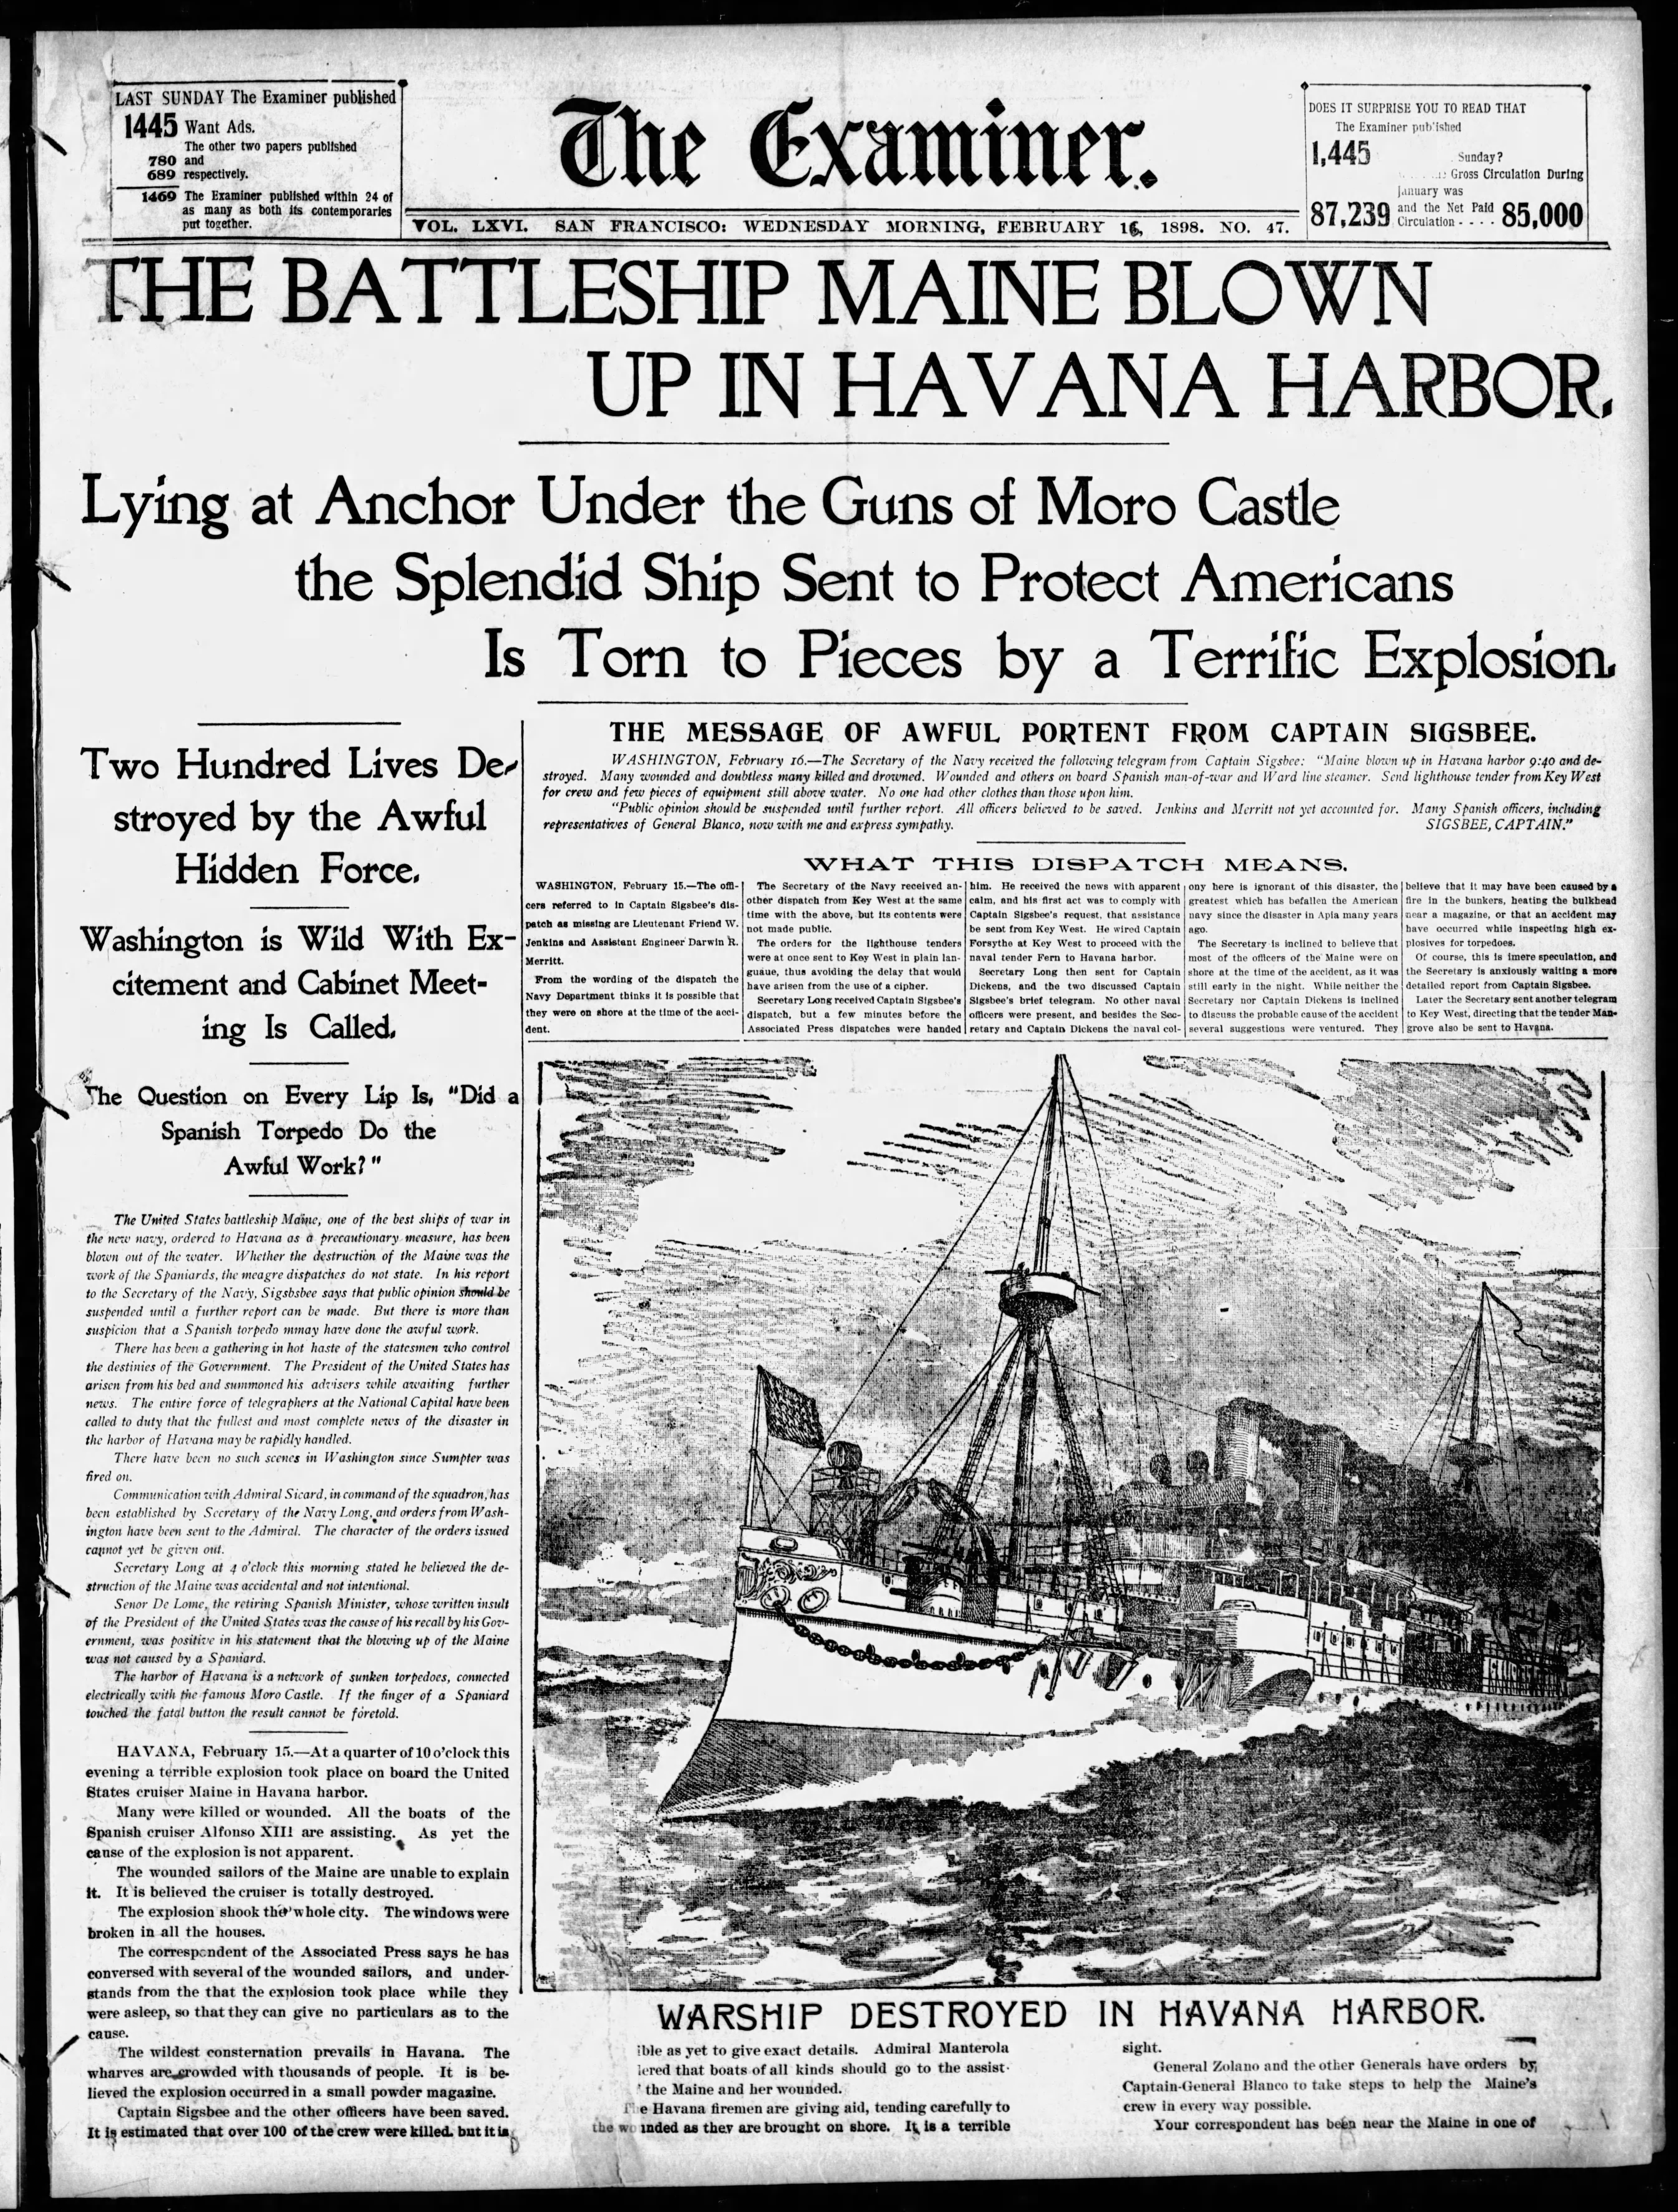 Front page of the San Francisco Examiner dated Feb 16 1898 with headline "The Battleship Maine Blown Up in Havana Harbor"